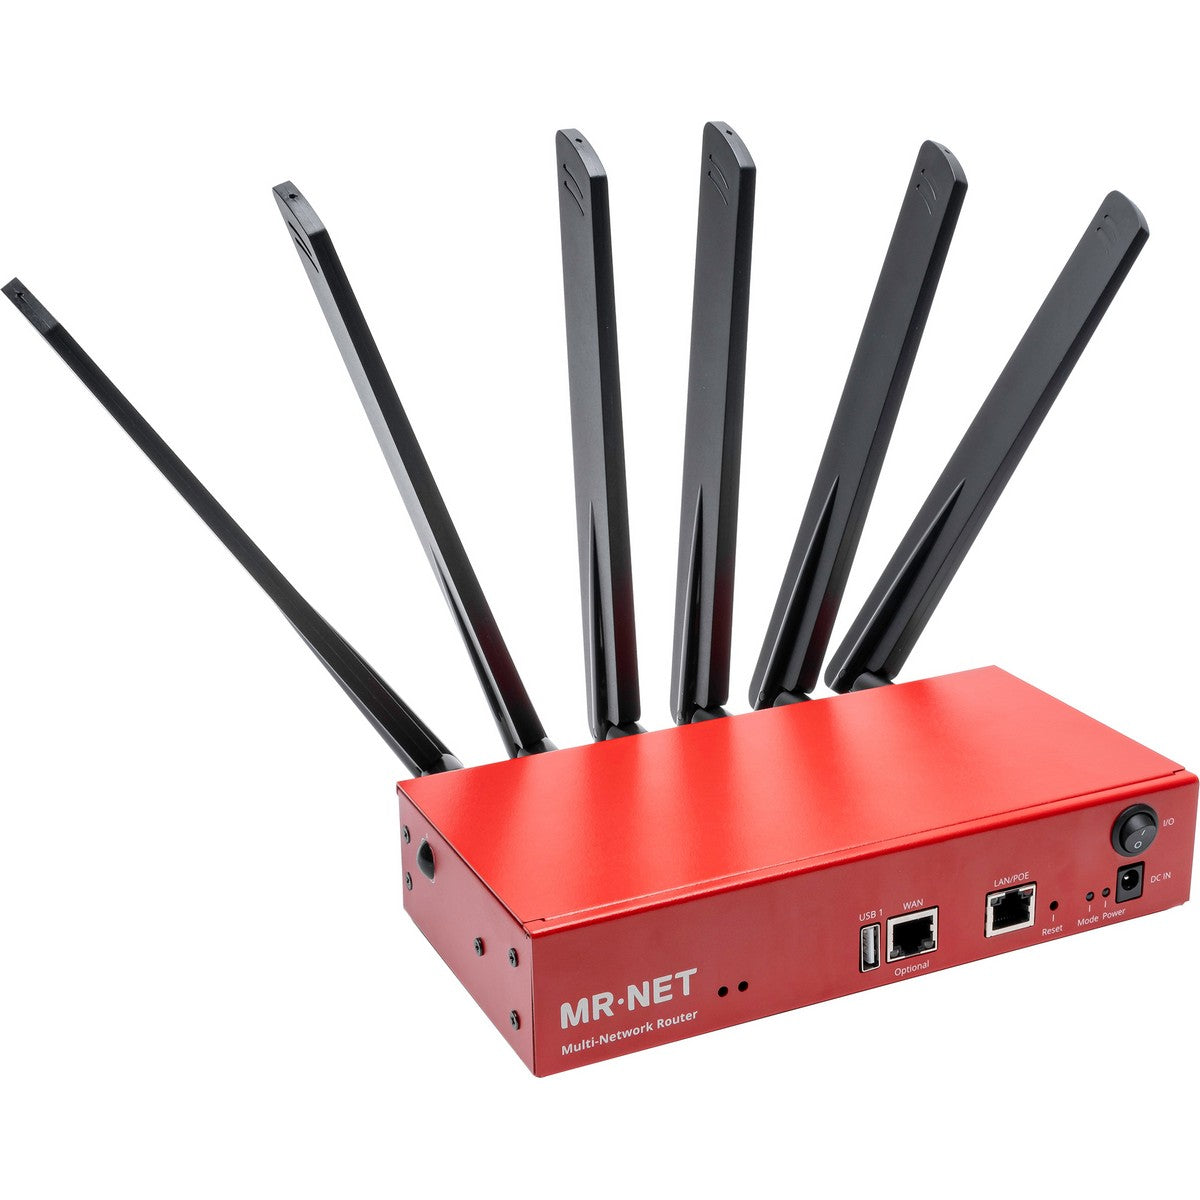 MR-NET+ Self Redundant Streaming IP Multi-Router with 3 LTE Modems